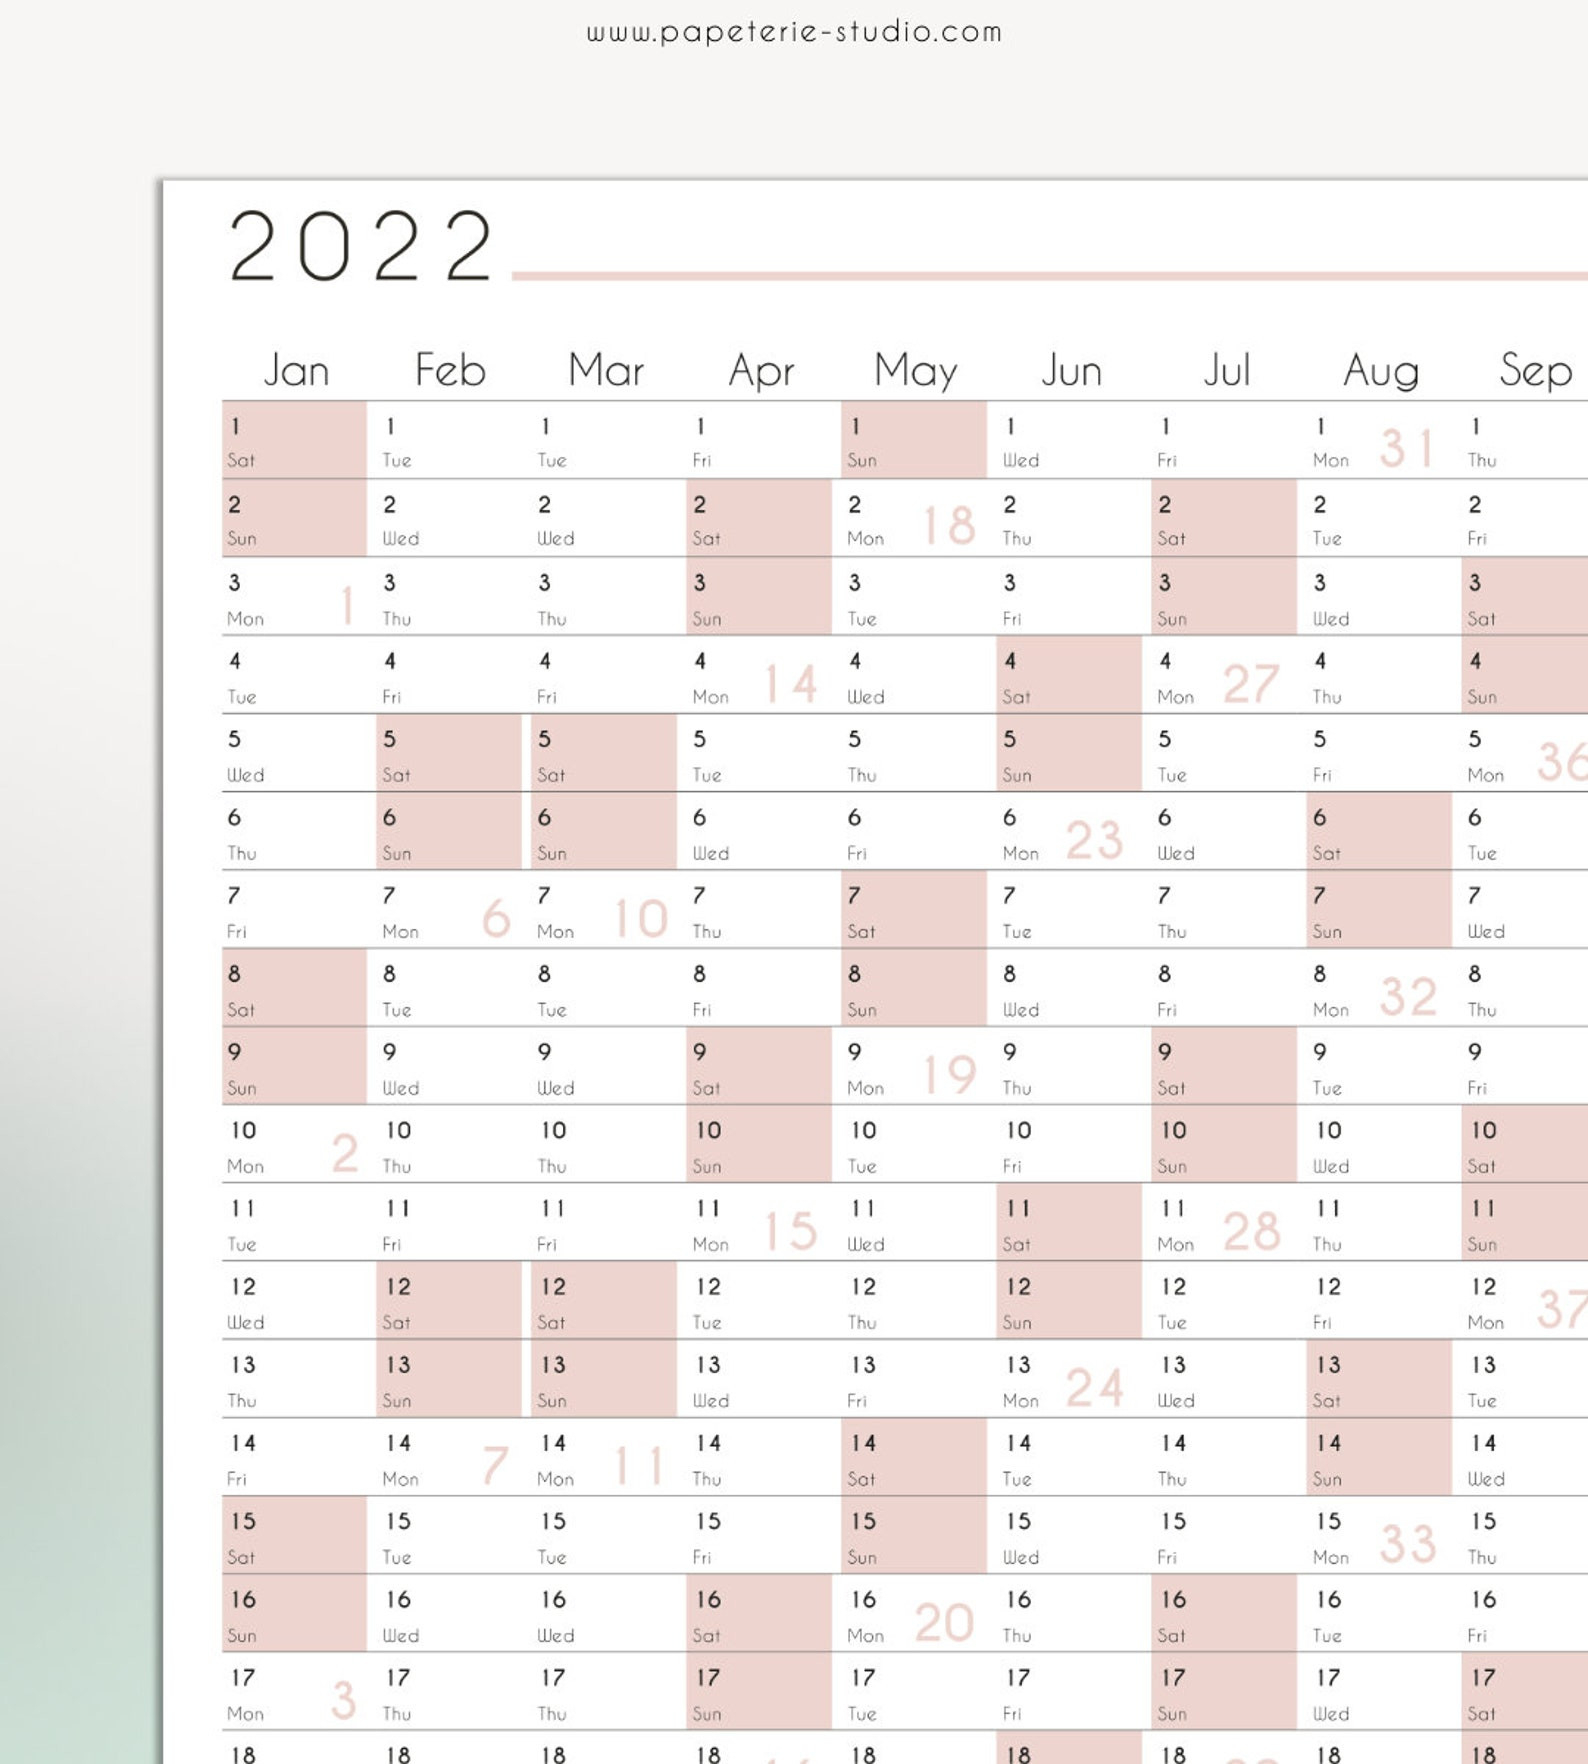 2022 Yearly Wall Calendar Printable Wall Planner 2022 | Etsy  Printable Calendar 2022 Planner